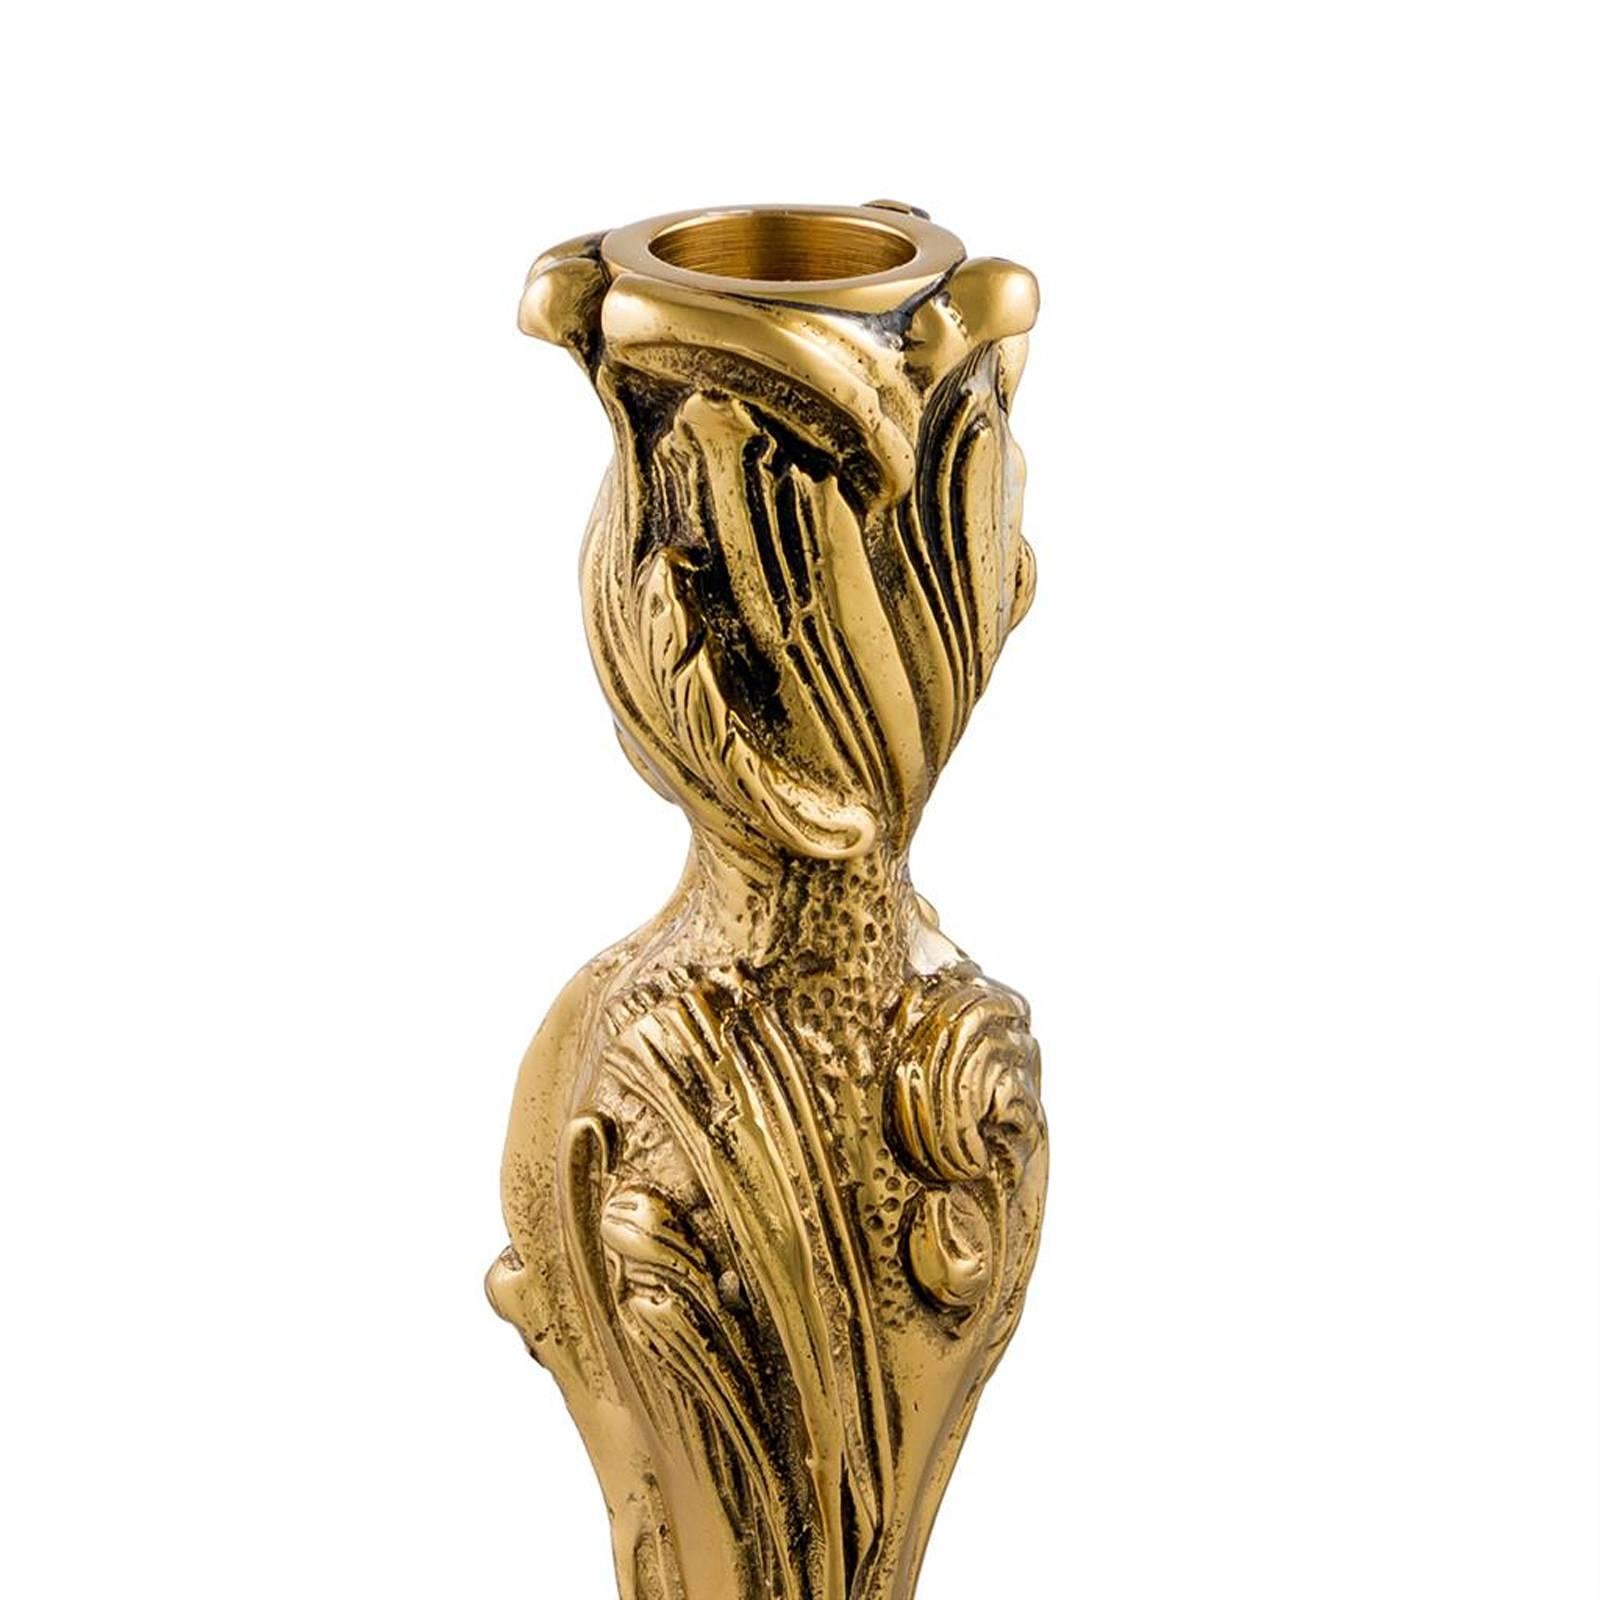 Contemporary Brazio Candle Holder in Gold Finish or Silver Plated Finish